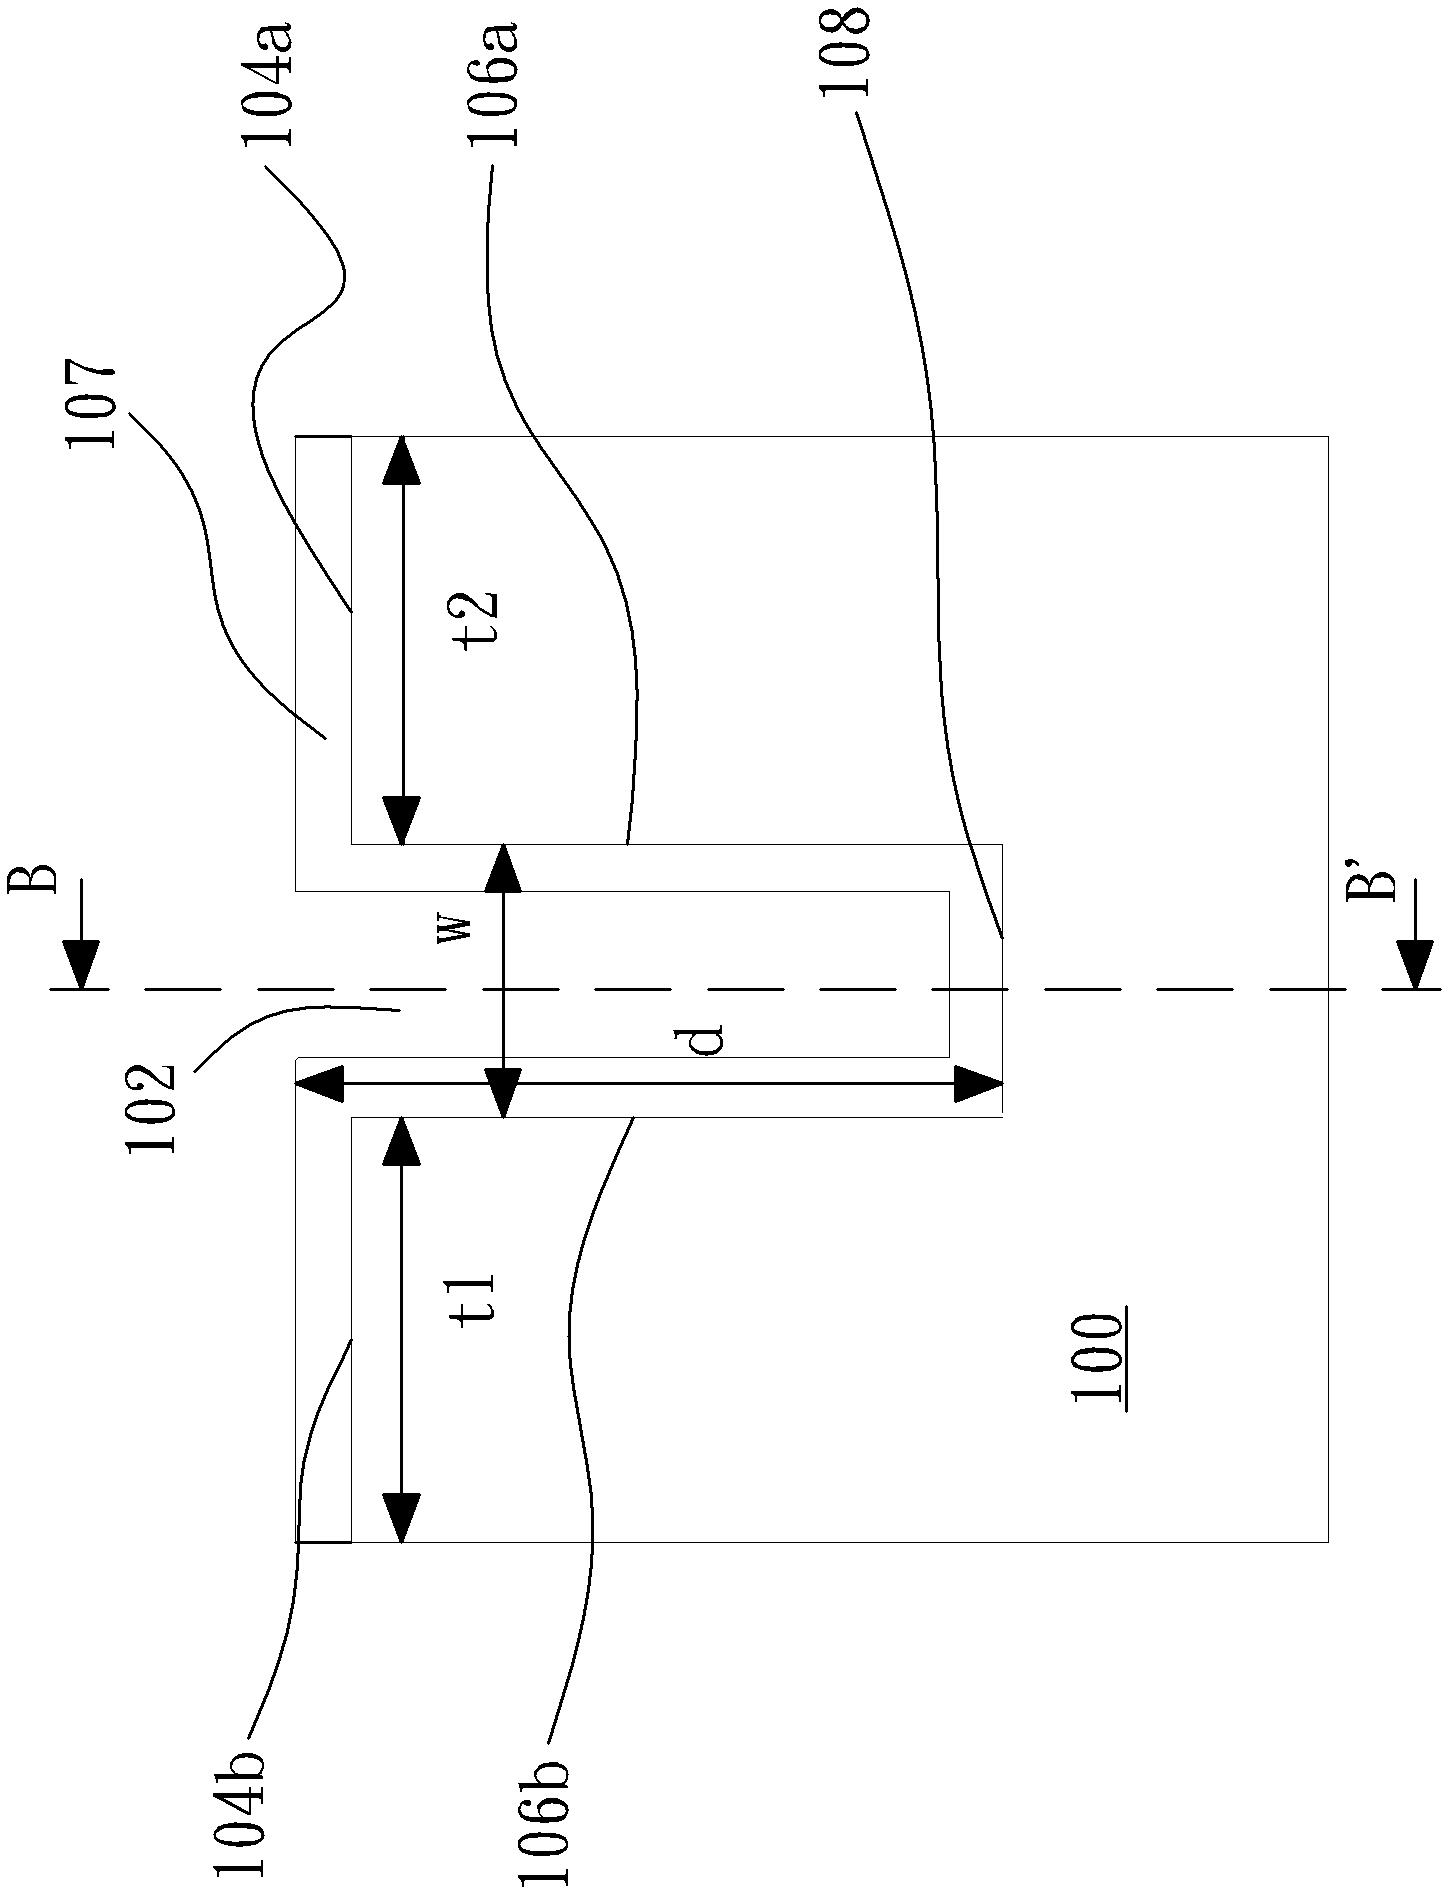 Trench junction barrier schottky structure with enhanced contact area integrated with a mosfet